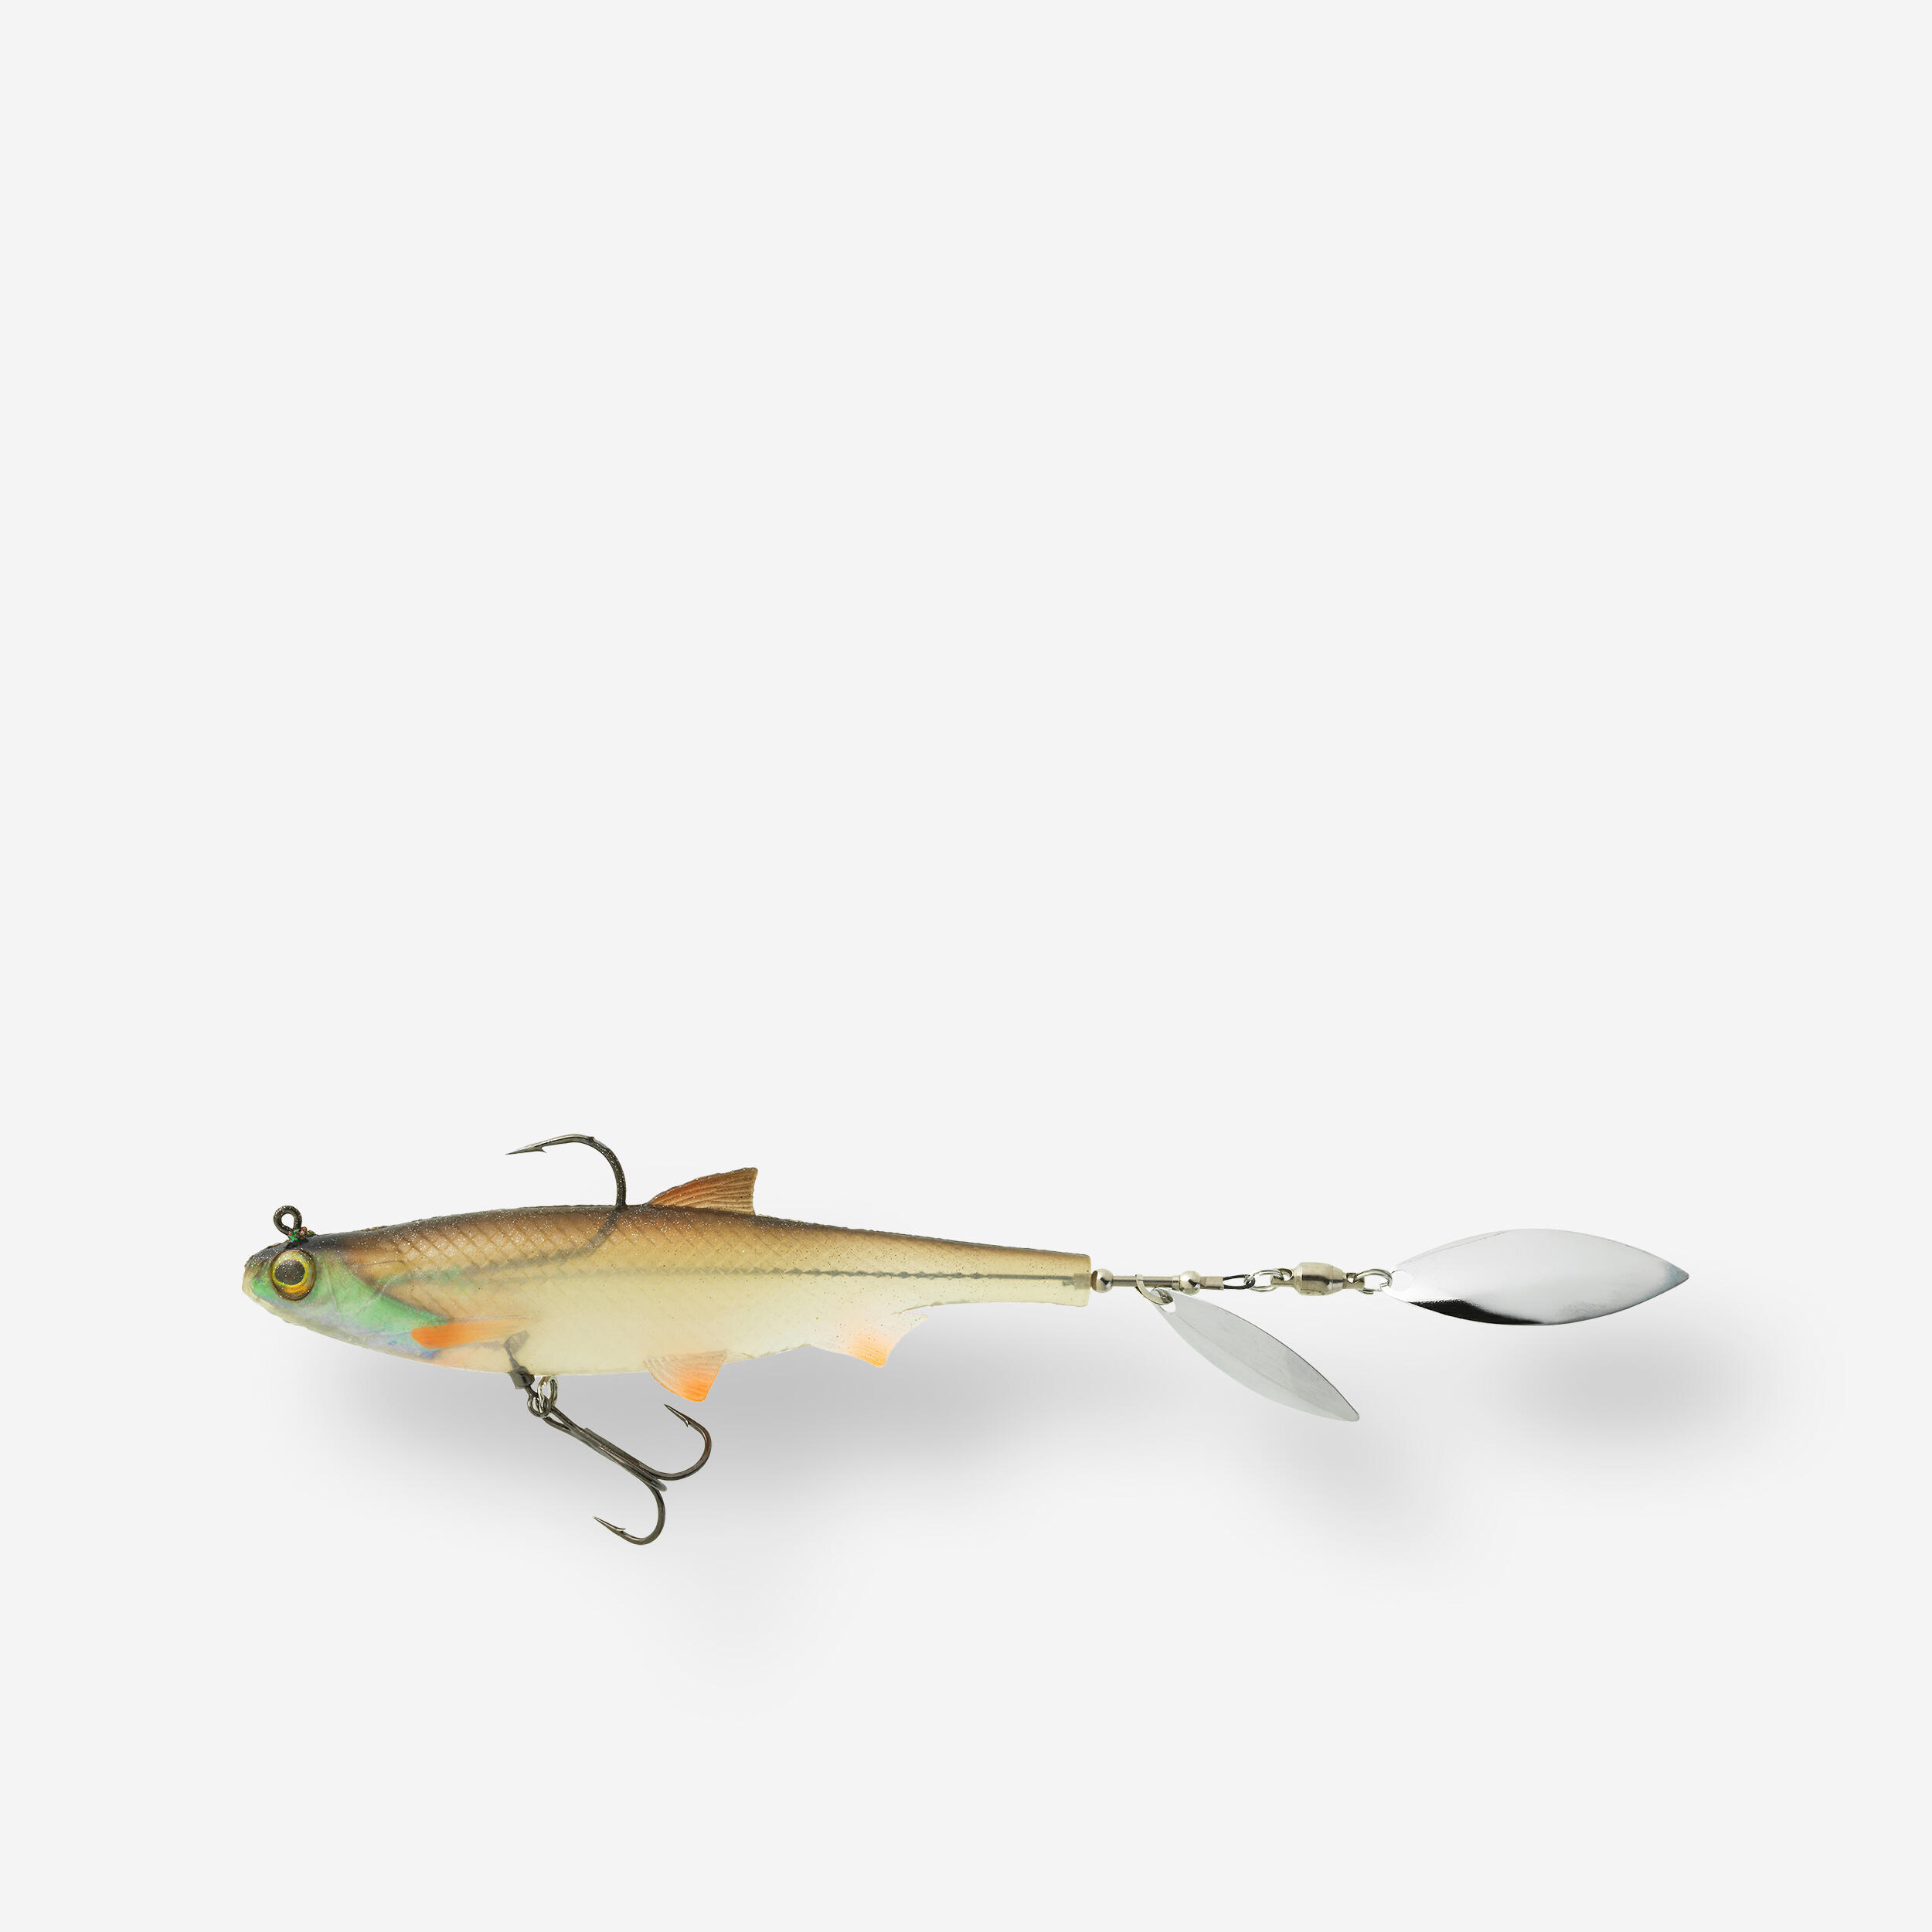 LURE FISHING ROACHSPIN 120 ROACH BLADED SHAD SOFT LURE - Cream